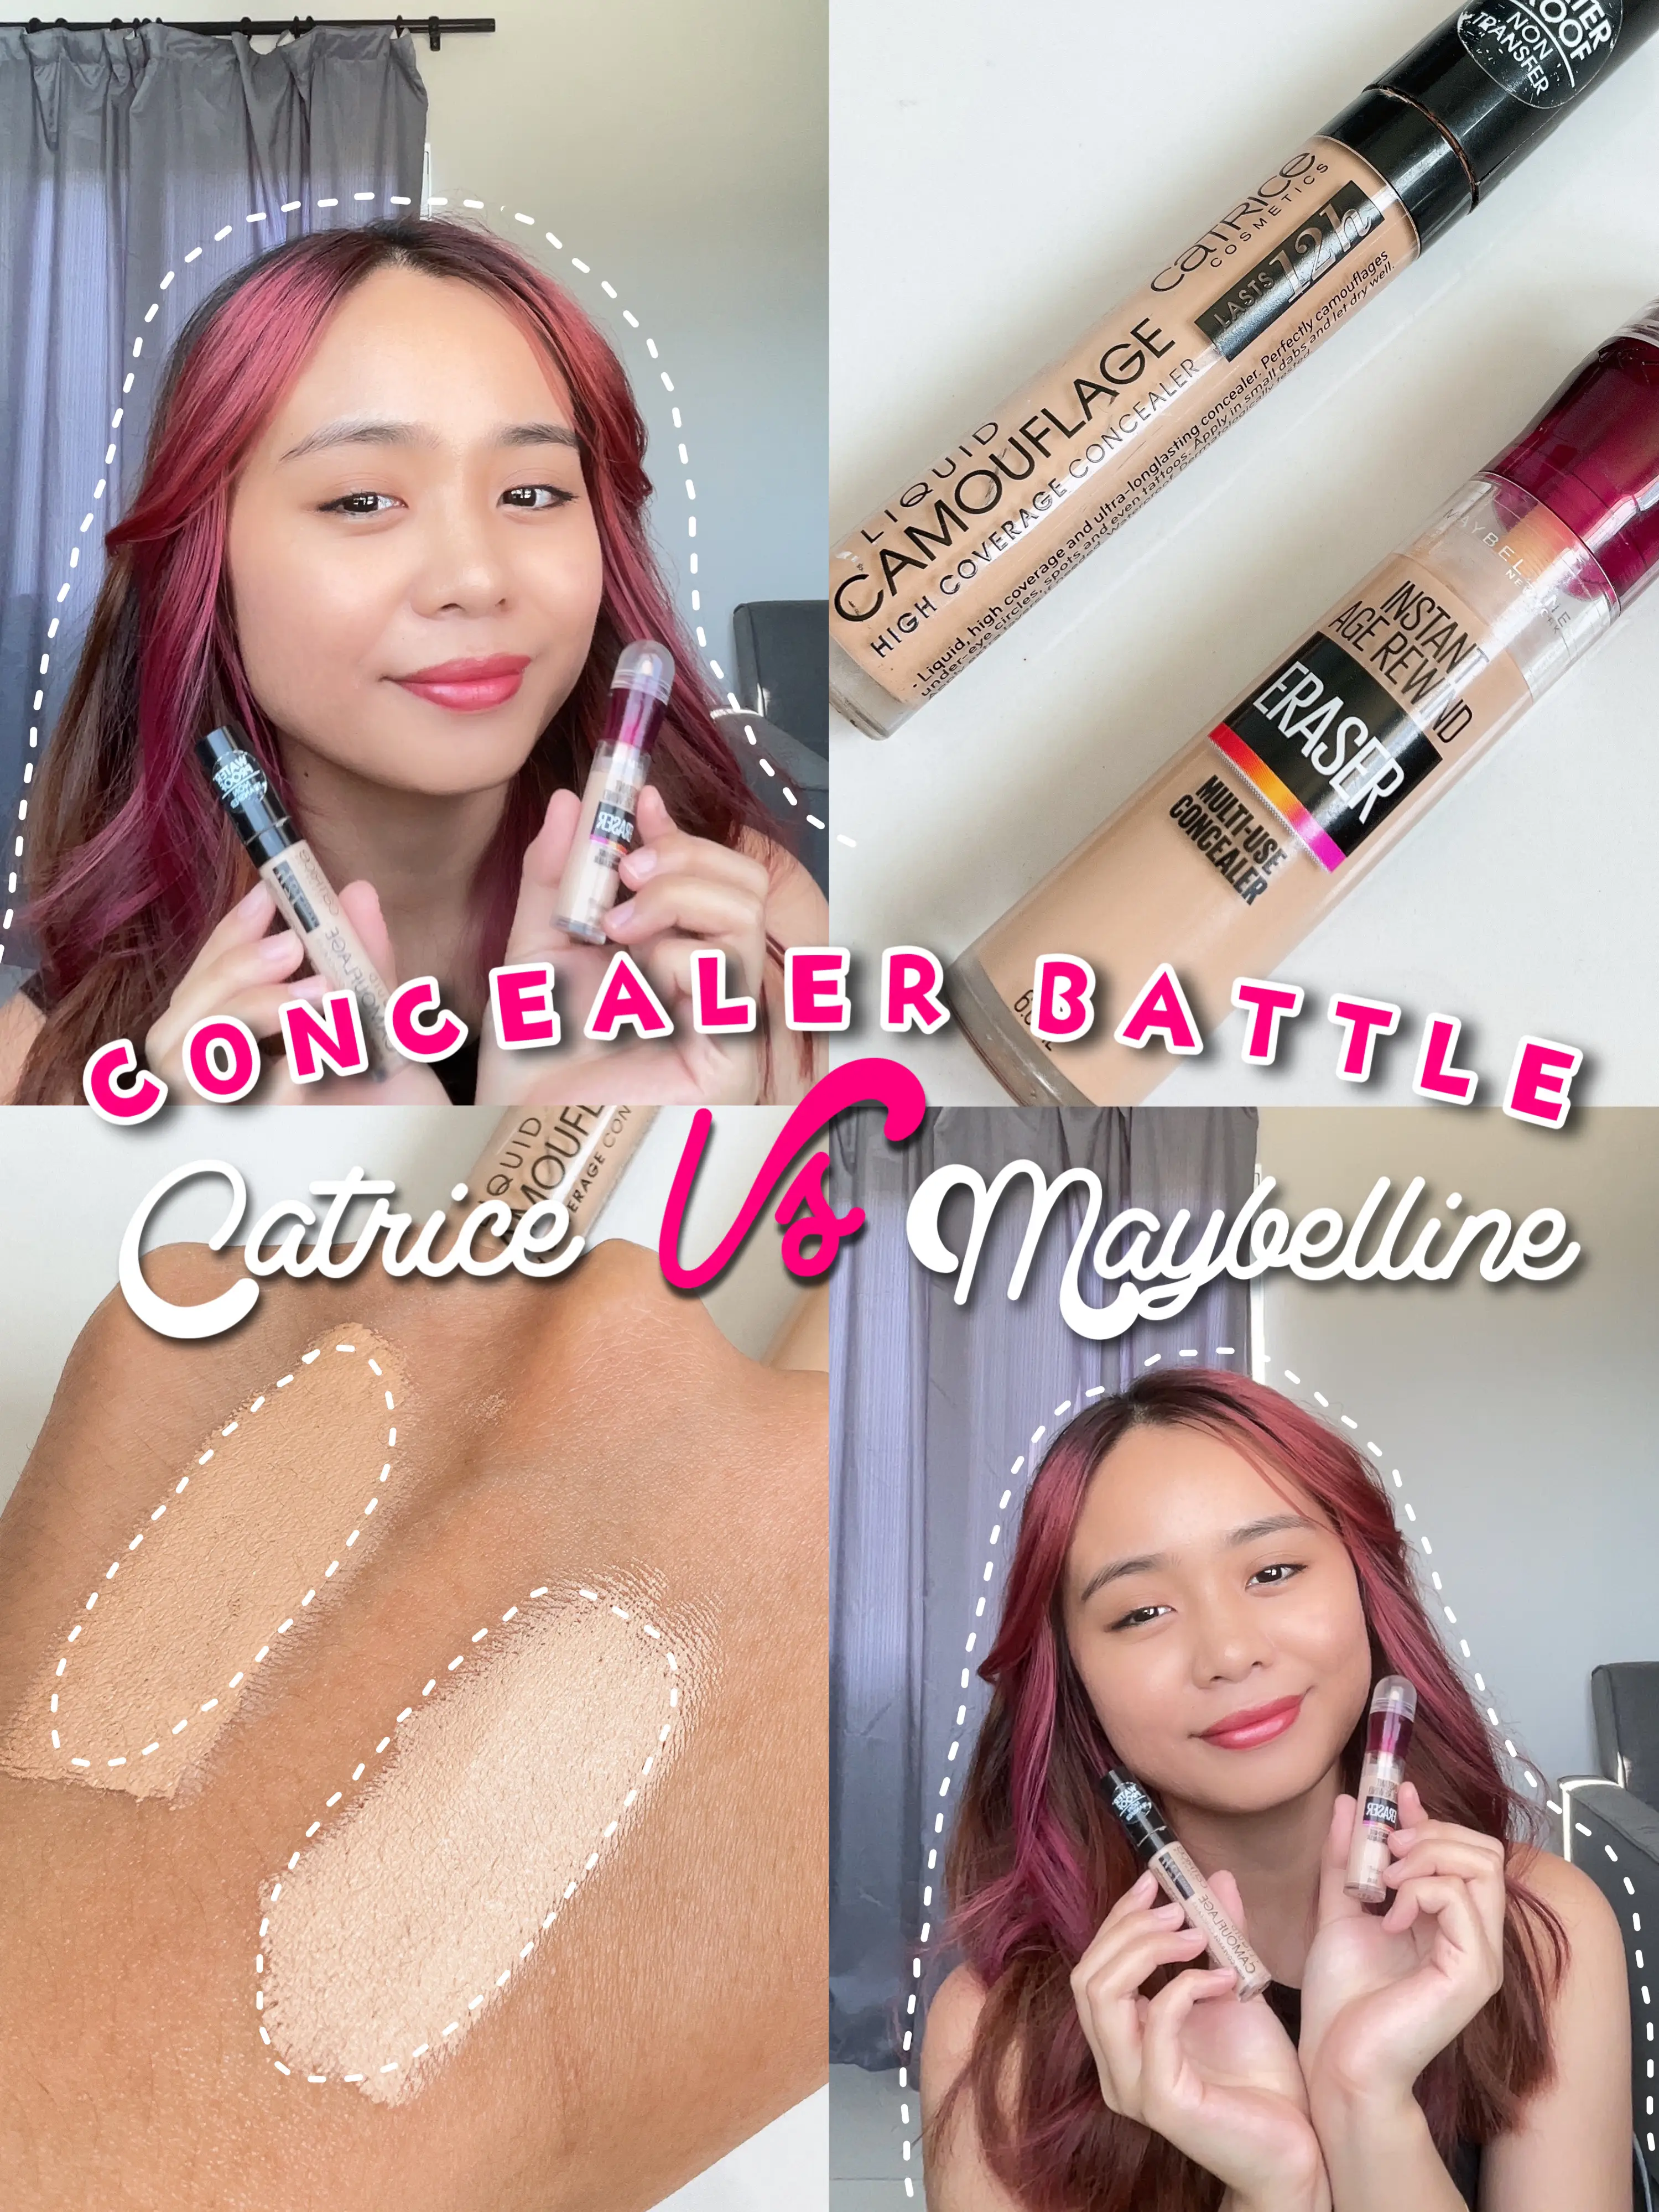 Concealer battle! This or that? 🤯 posted by ashantharosary Lemon8